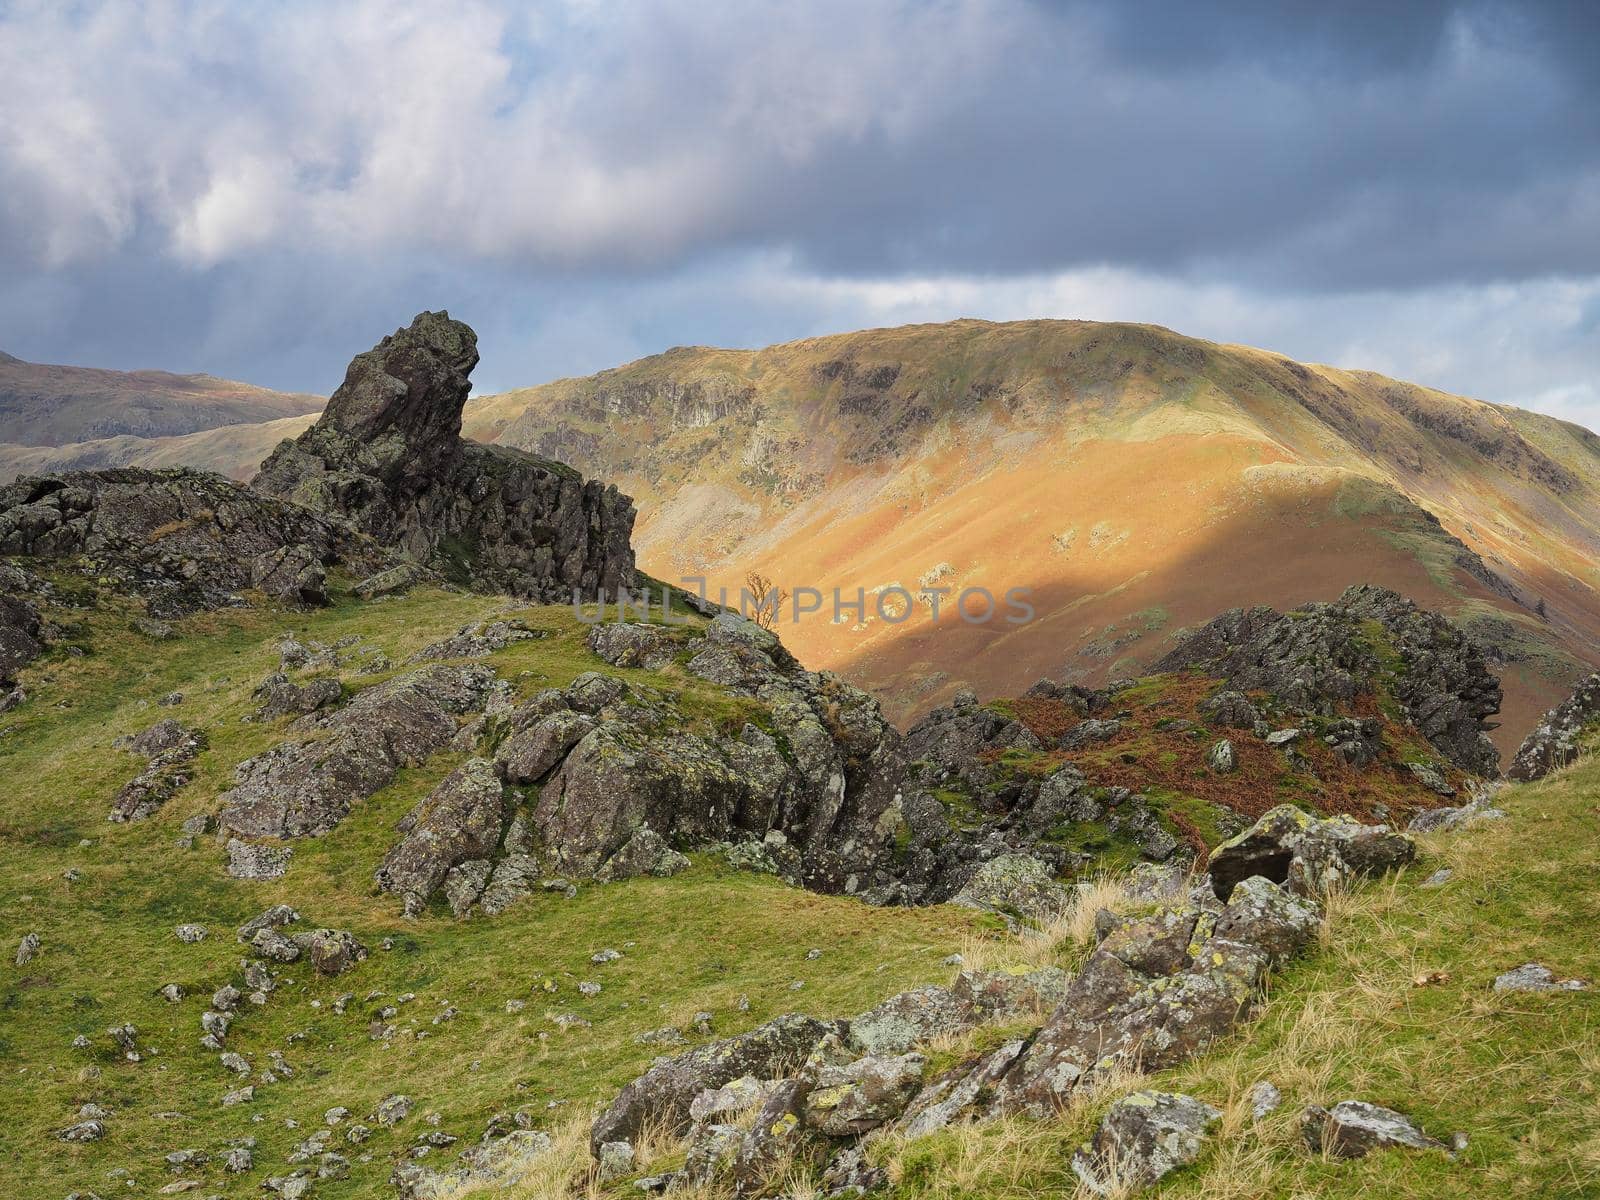 Rock formation 'The Howitzer' on Helm Crag overlooking Steel Crag, Lake District by PhilHarland